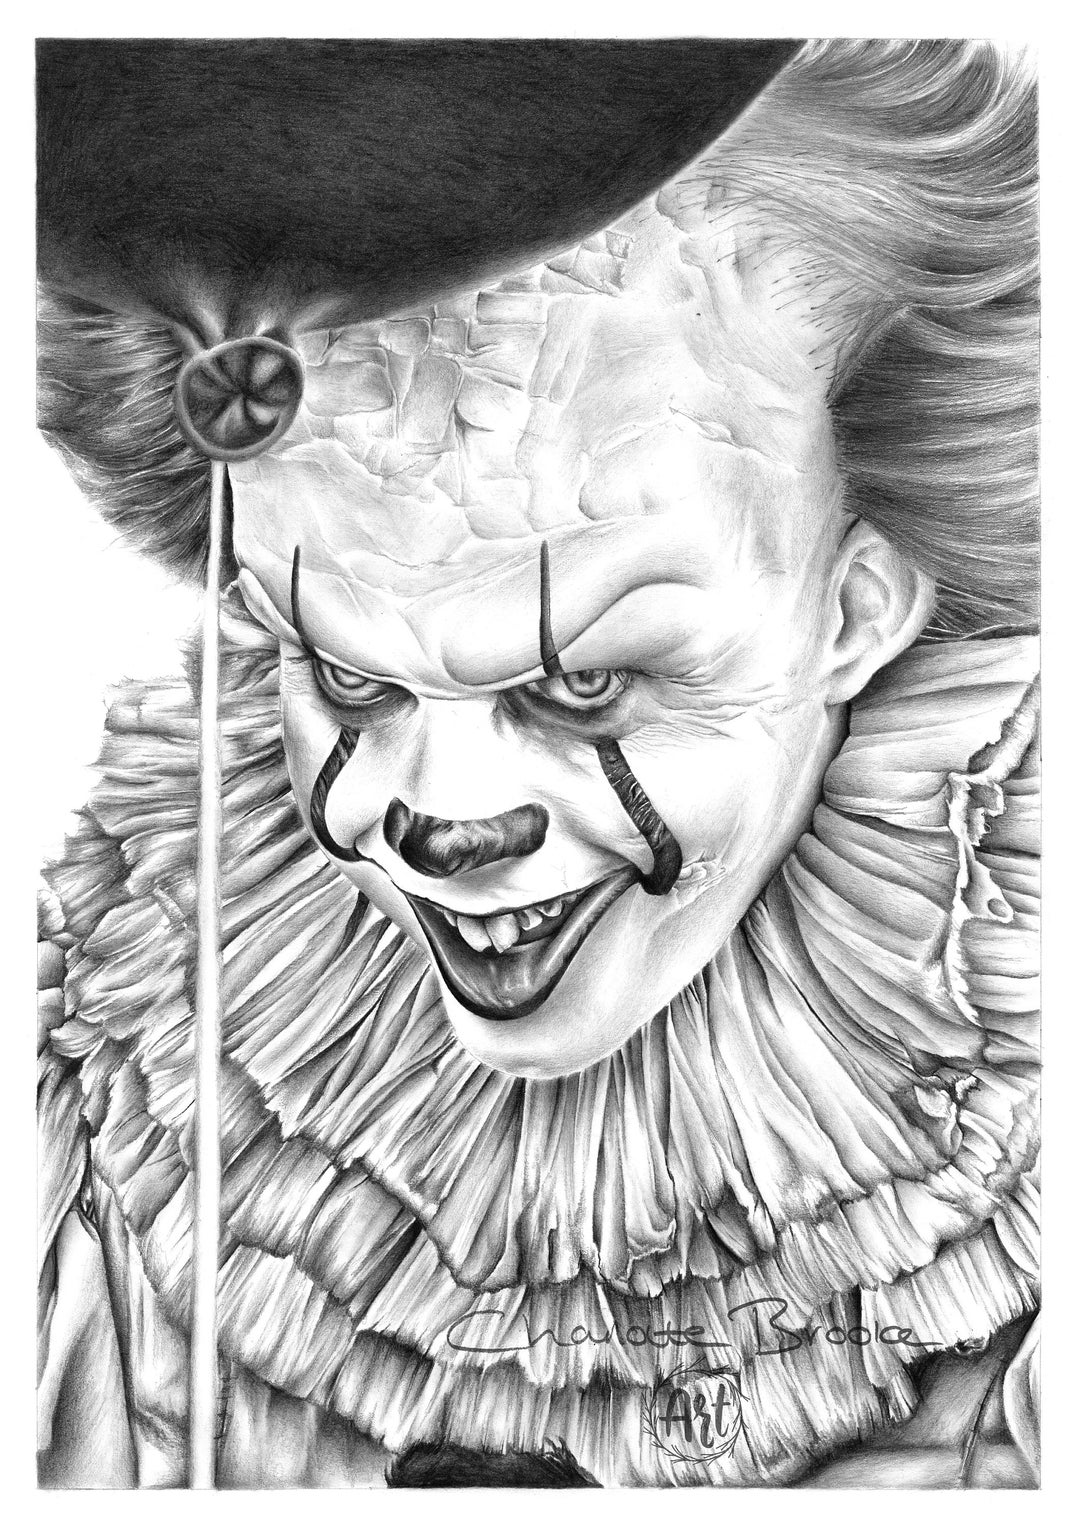 Pennywise Drawing - adrian.drawings - Drawings & Illustration